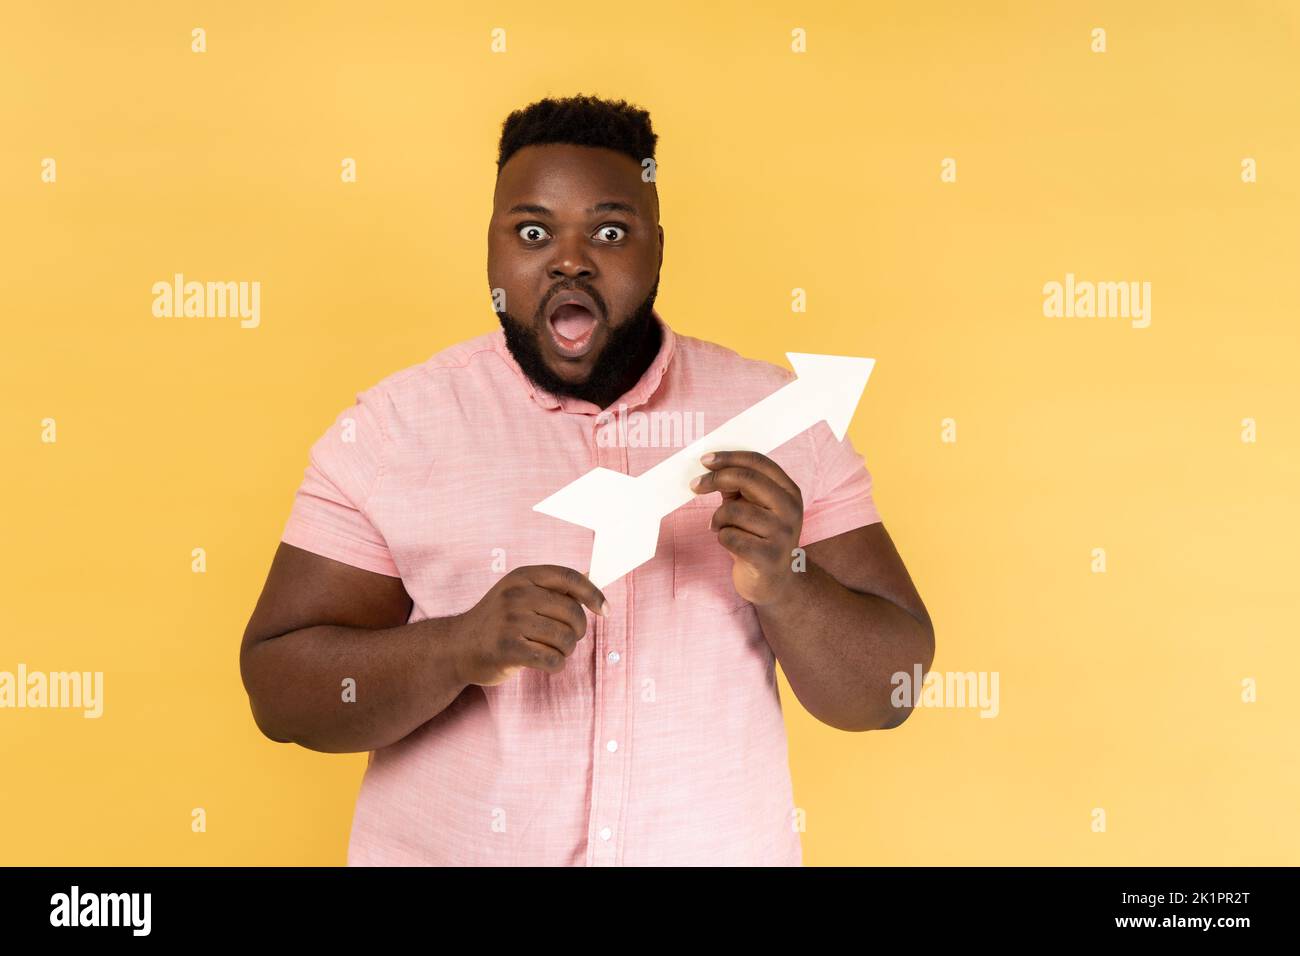 Portrait of astonished surprised man wearing pink shirt pointing direction with arrow aside, looking at camera with big eyes and open mouth. Indoor studio shot isolated on yellow background. Stock Photo